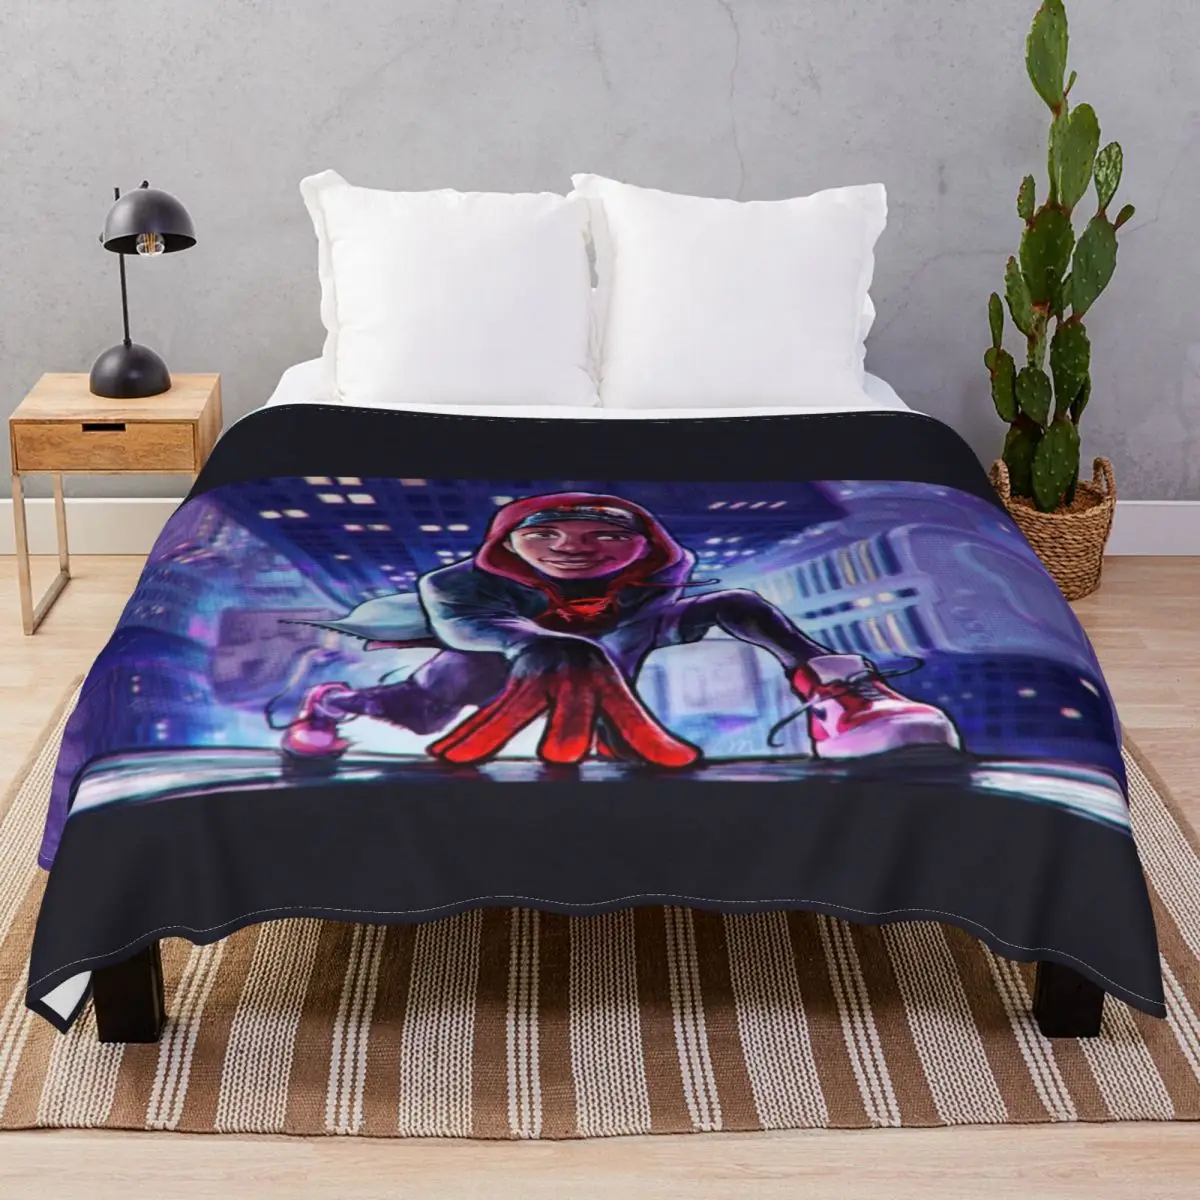 Miles Morales Blankets Flannel Printed Multi-function Throw Blanket for Bed Sofa Camp Cinema